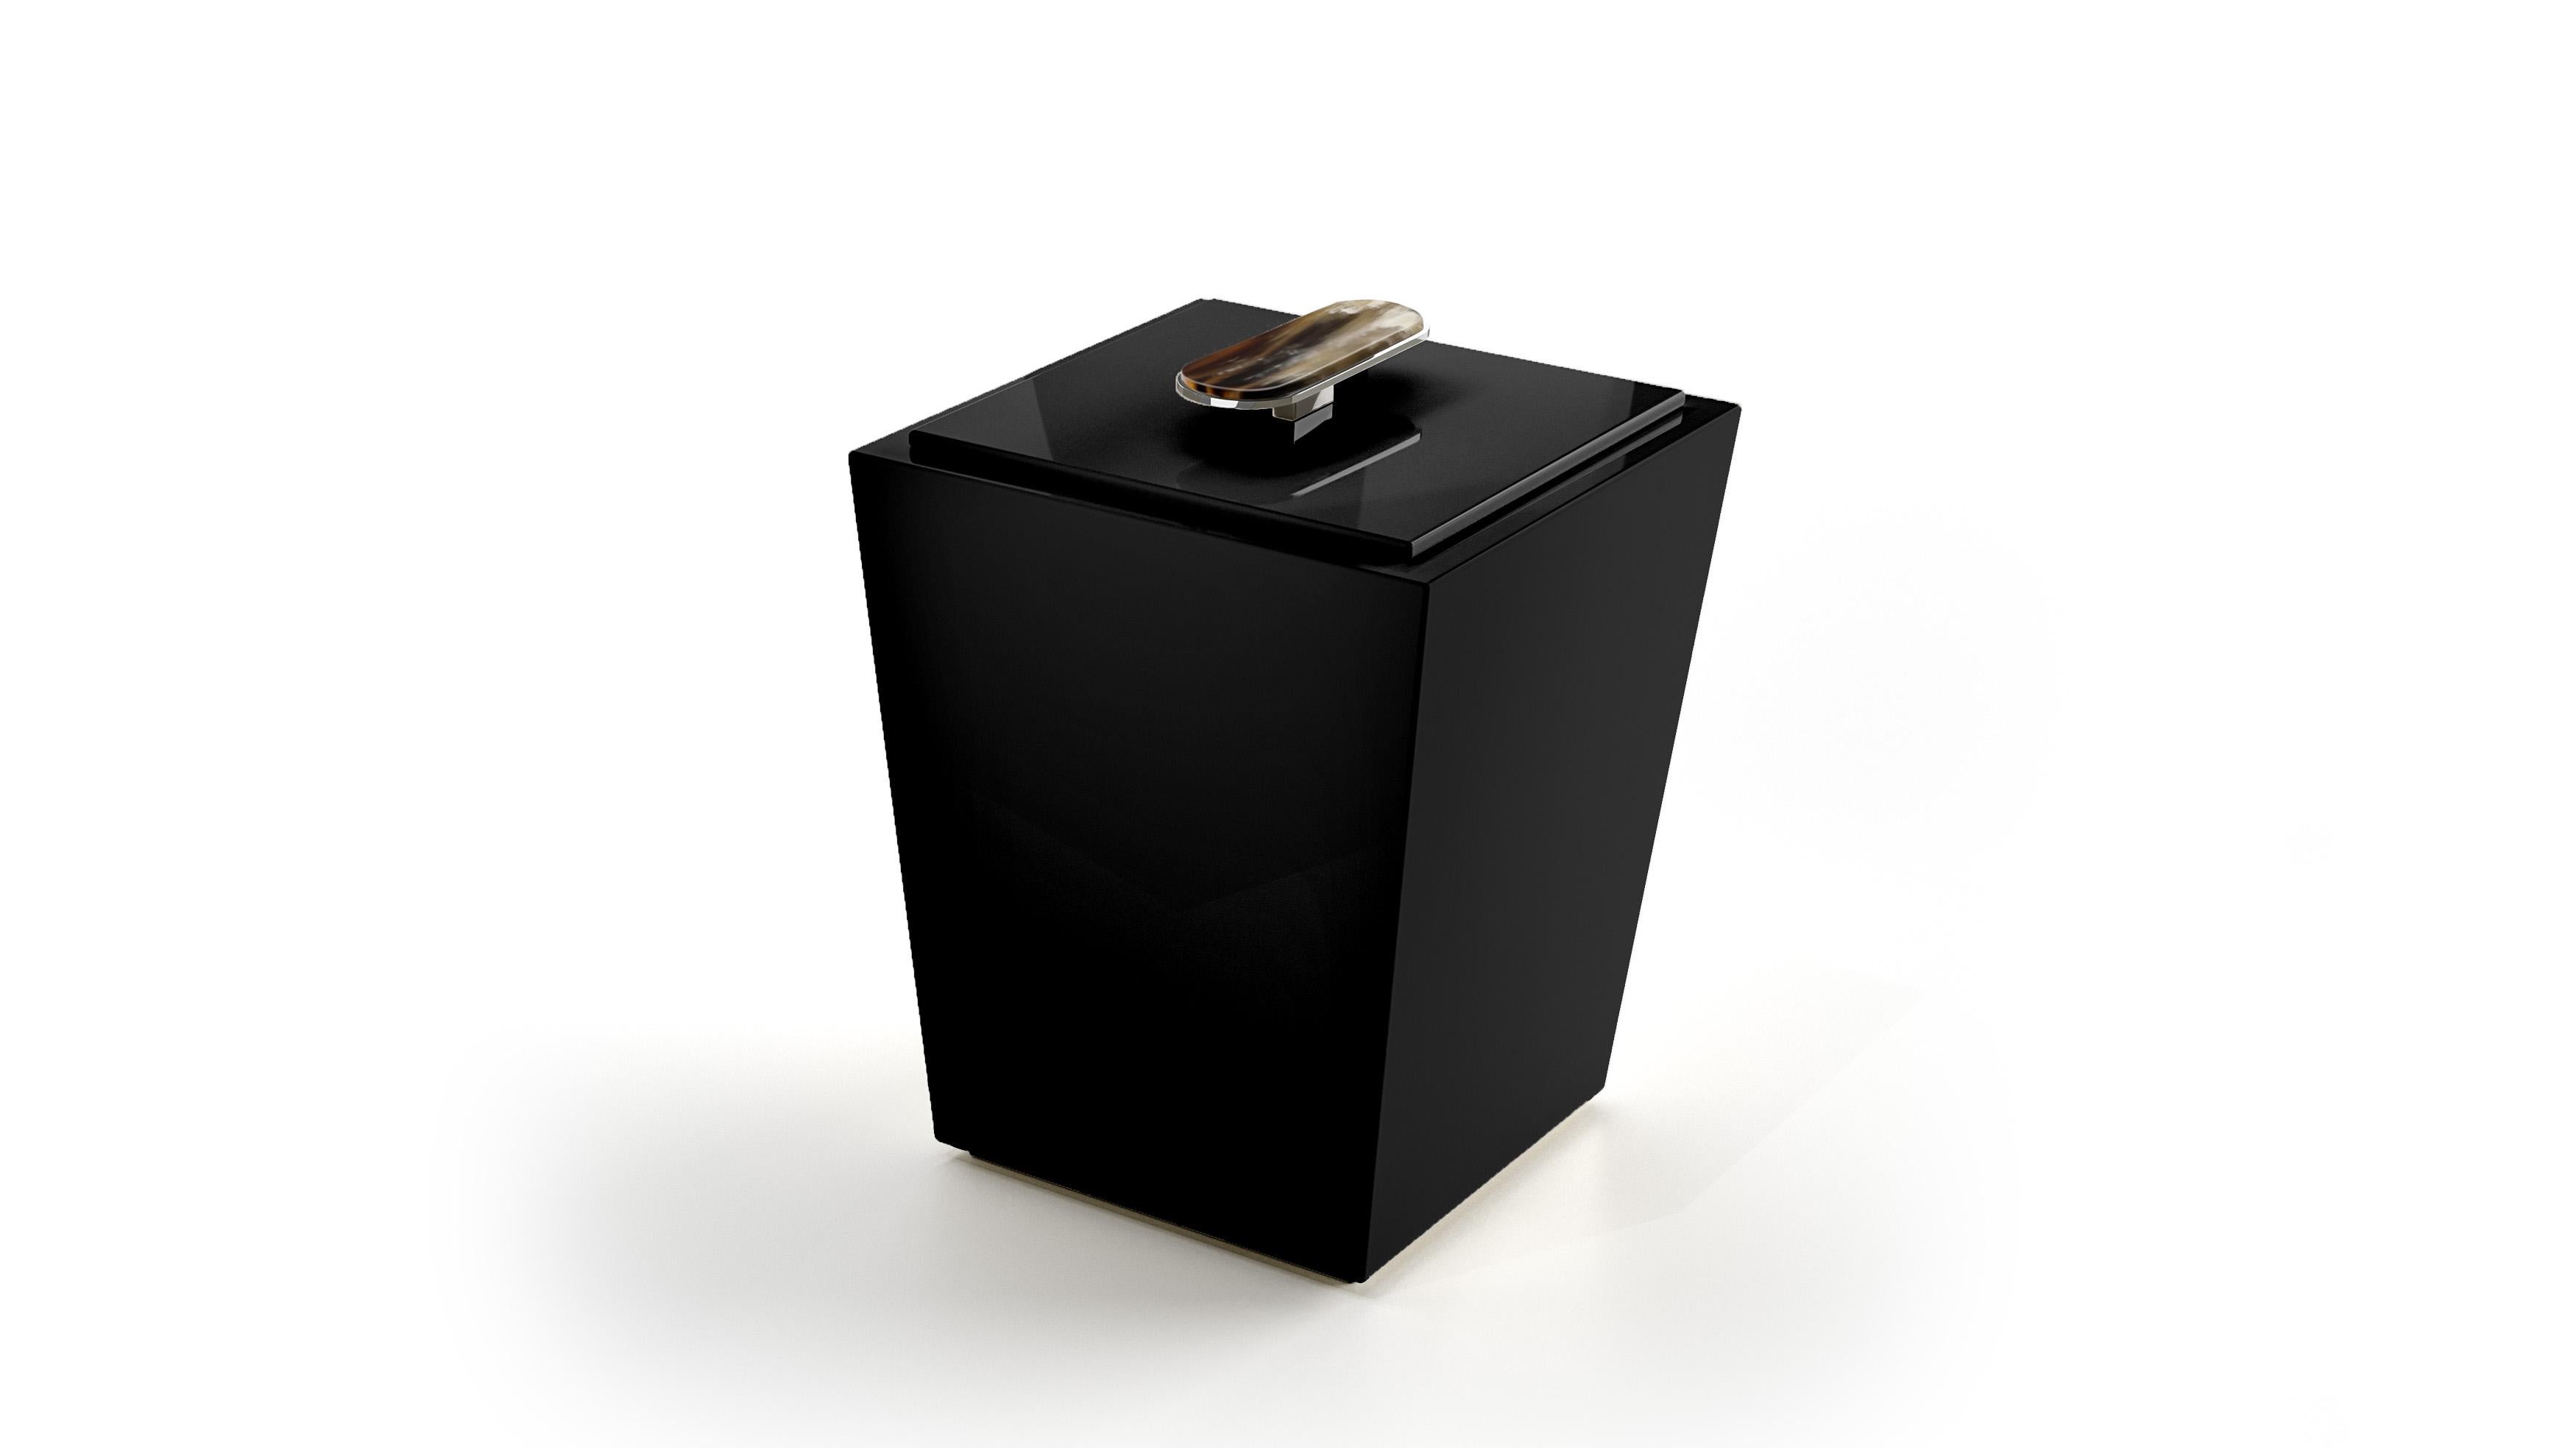 Blending elegance and craftsmanship, the Bicco waste paper basket is a standout element that will enhance the aesthetic of any bathroom or office. Crafted from black lacquered wood, the polished finish enhances the clean lines of its design. Bicco